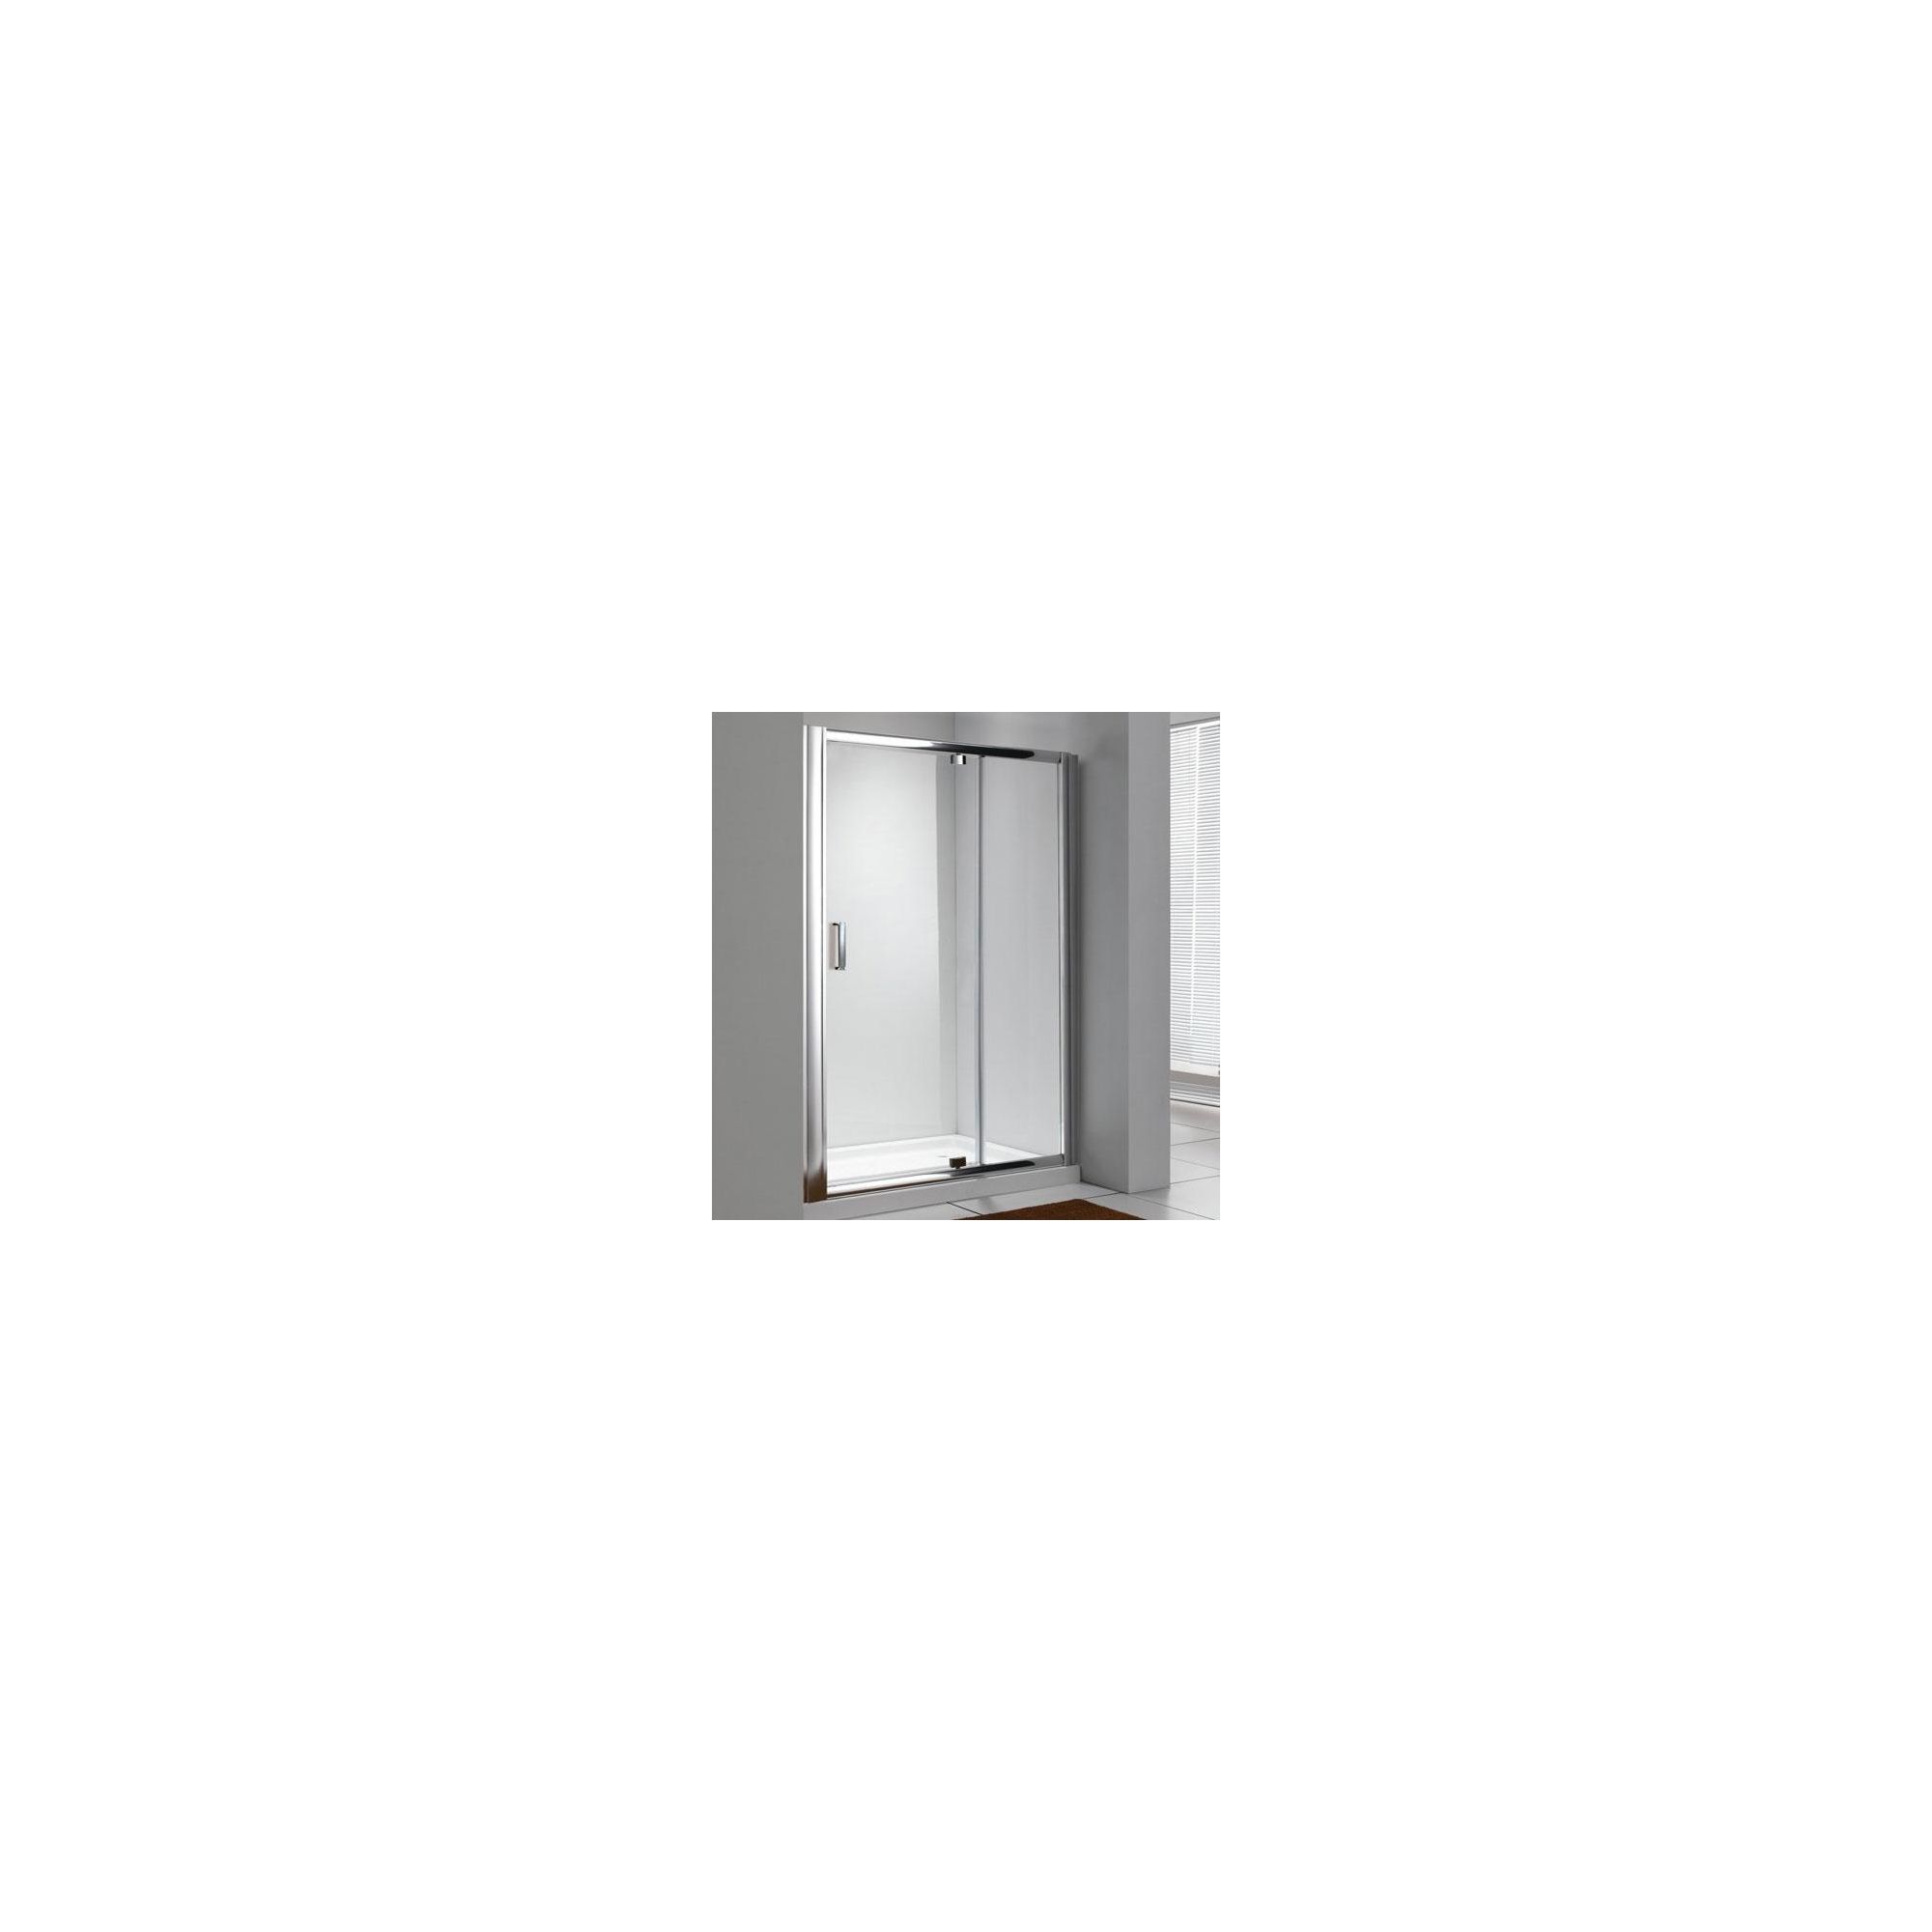 Duchy Style Pivot Door Shower Enclosure, 1100mm x 900mm, 6mm Glass, Low Profile Tray at Tesco Direct